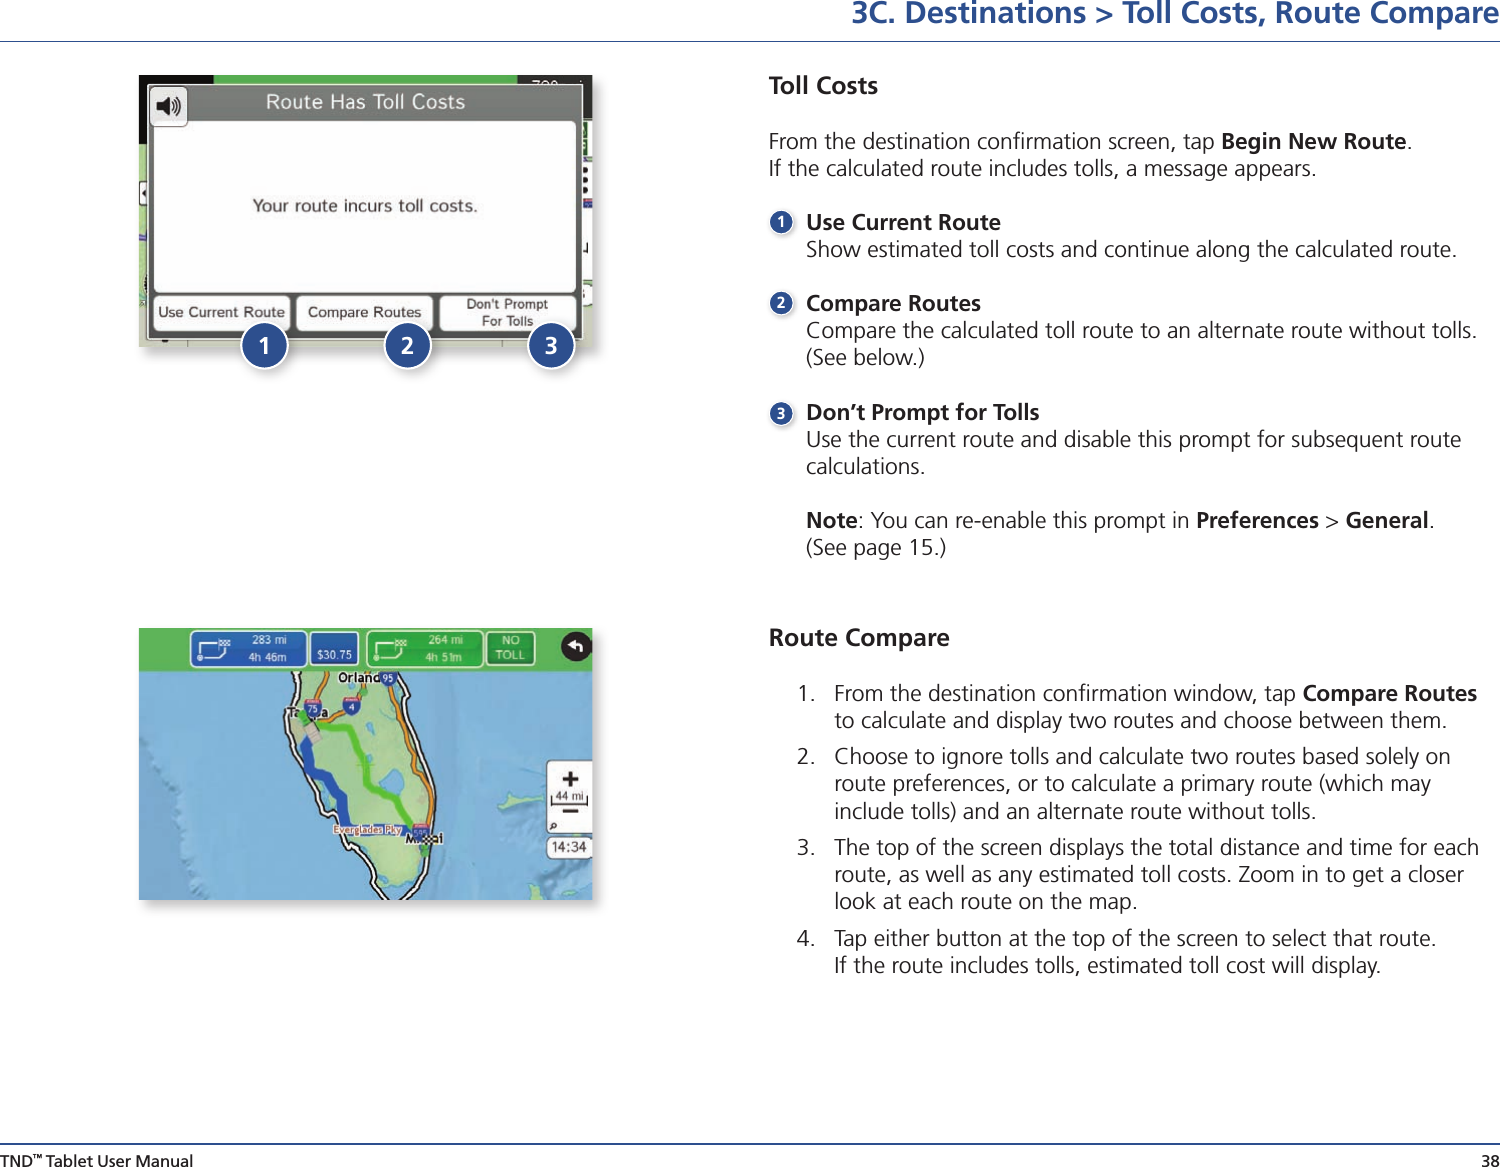 TND™ Tablet User Manual 383C. Destinations &gt; Toll Costs, Route CompareToll CostsFrom the destination conﬁrmation screen, tap Begin New Route.  If the calculated route includes tolls, a message appears. Use Current Route  Show estimated toll costs and continue along the calculated route.              Compare Routes  Compare the calculated toll route to an alternate route without tolls.    (See below.) Don’t Prompt for Tolls  Use the current route and disable this prompt for subsequent route   calculations.   Note: You can re-enable this prompt in Preferences &gt; General.      (See page 15.)Route Compare1.  From the destination conﬁrmation window, tap Compare Routes to calculate and display two routes and choose between them.2.  Choose to ignore tolls and calculate two routes based solely on route preferences, or to calculate a primary route (which may  include tolls) and an alternate route without tolls.3.  The top of the screen displays the total distance and time for each route, as well as any estimated toll costs. Zoom in to get a closer look at each route on the map.4.  Tap either button at the top of the screen to select that route.  If the route includes tolls, estimated toll cost will display.1321 32